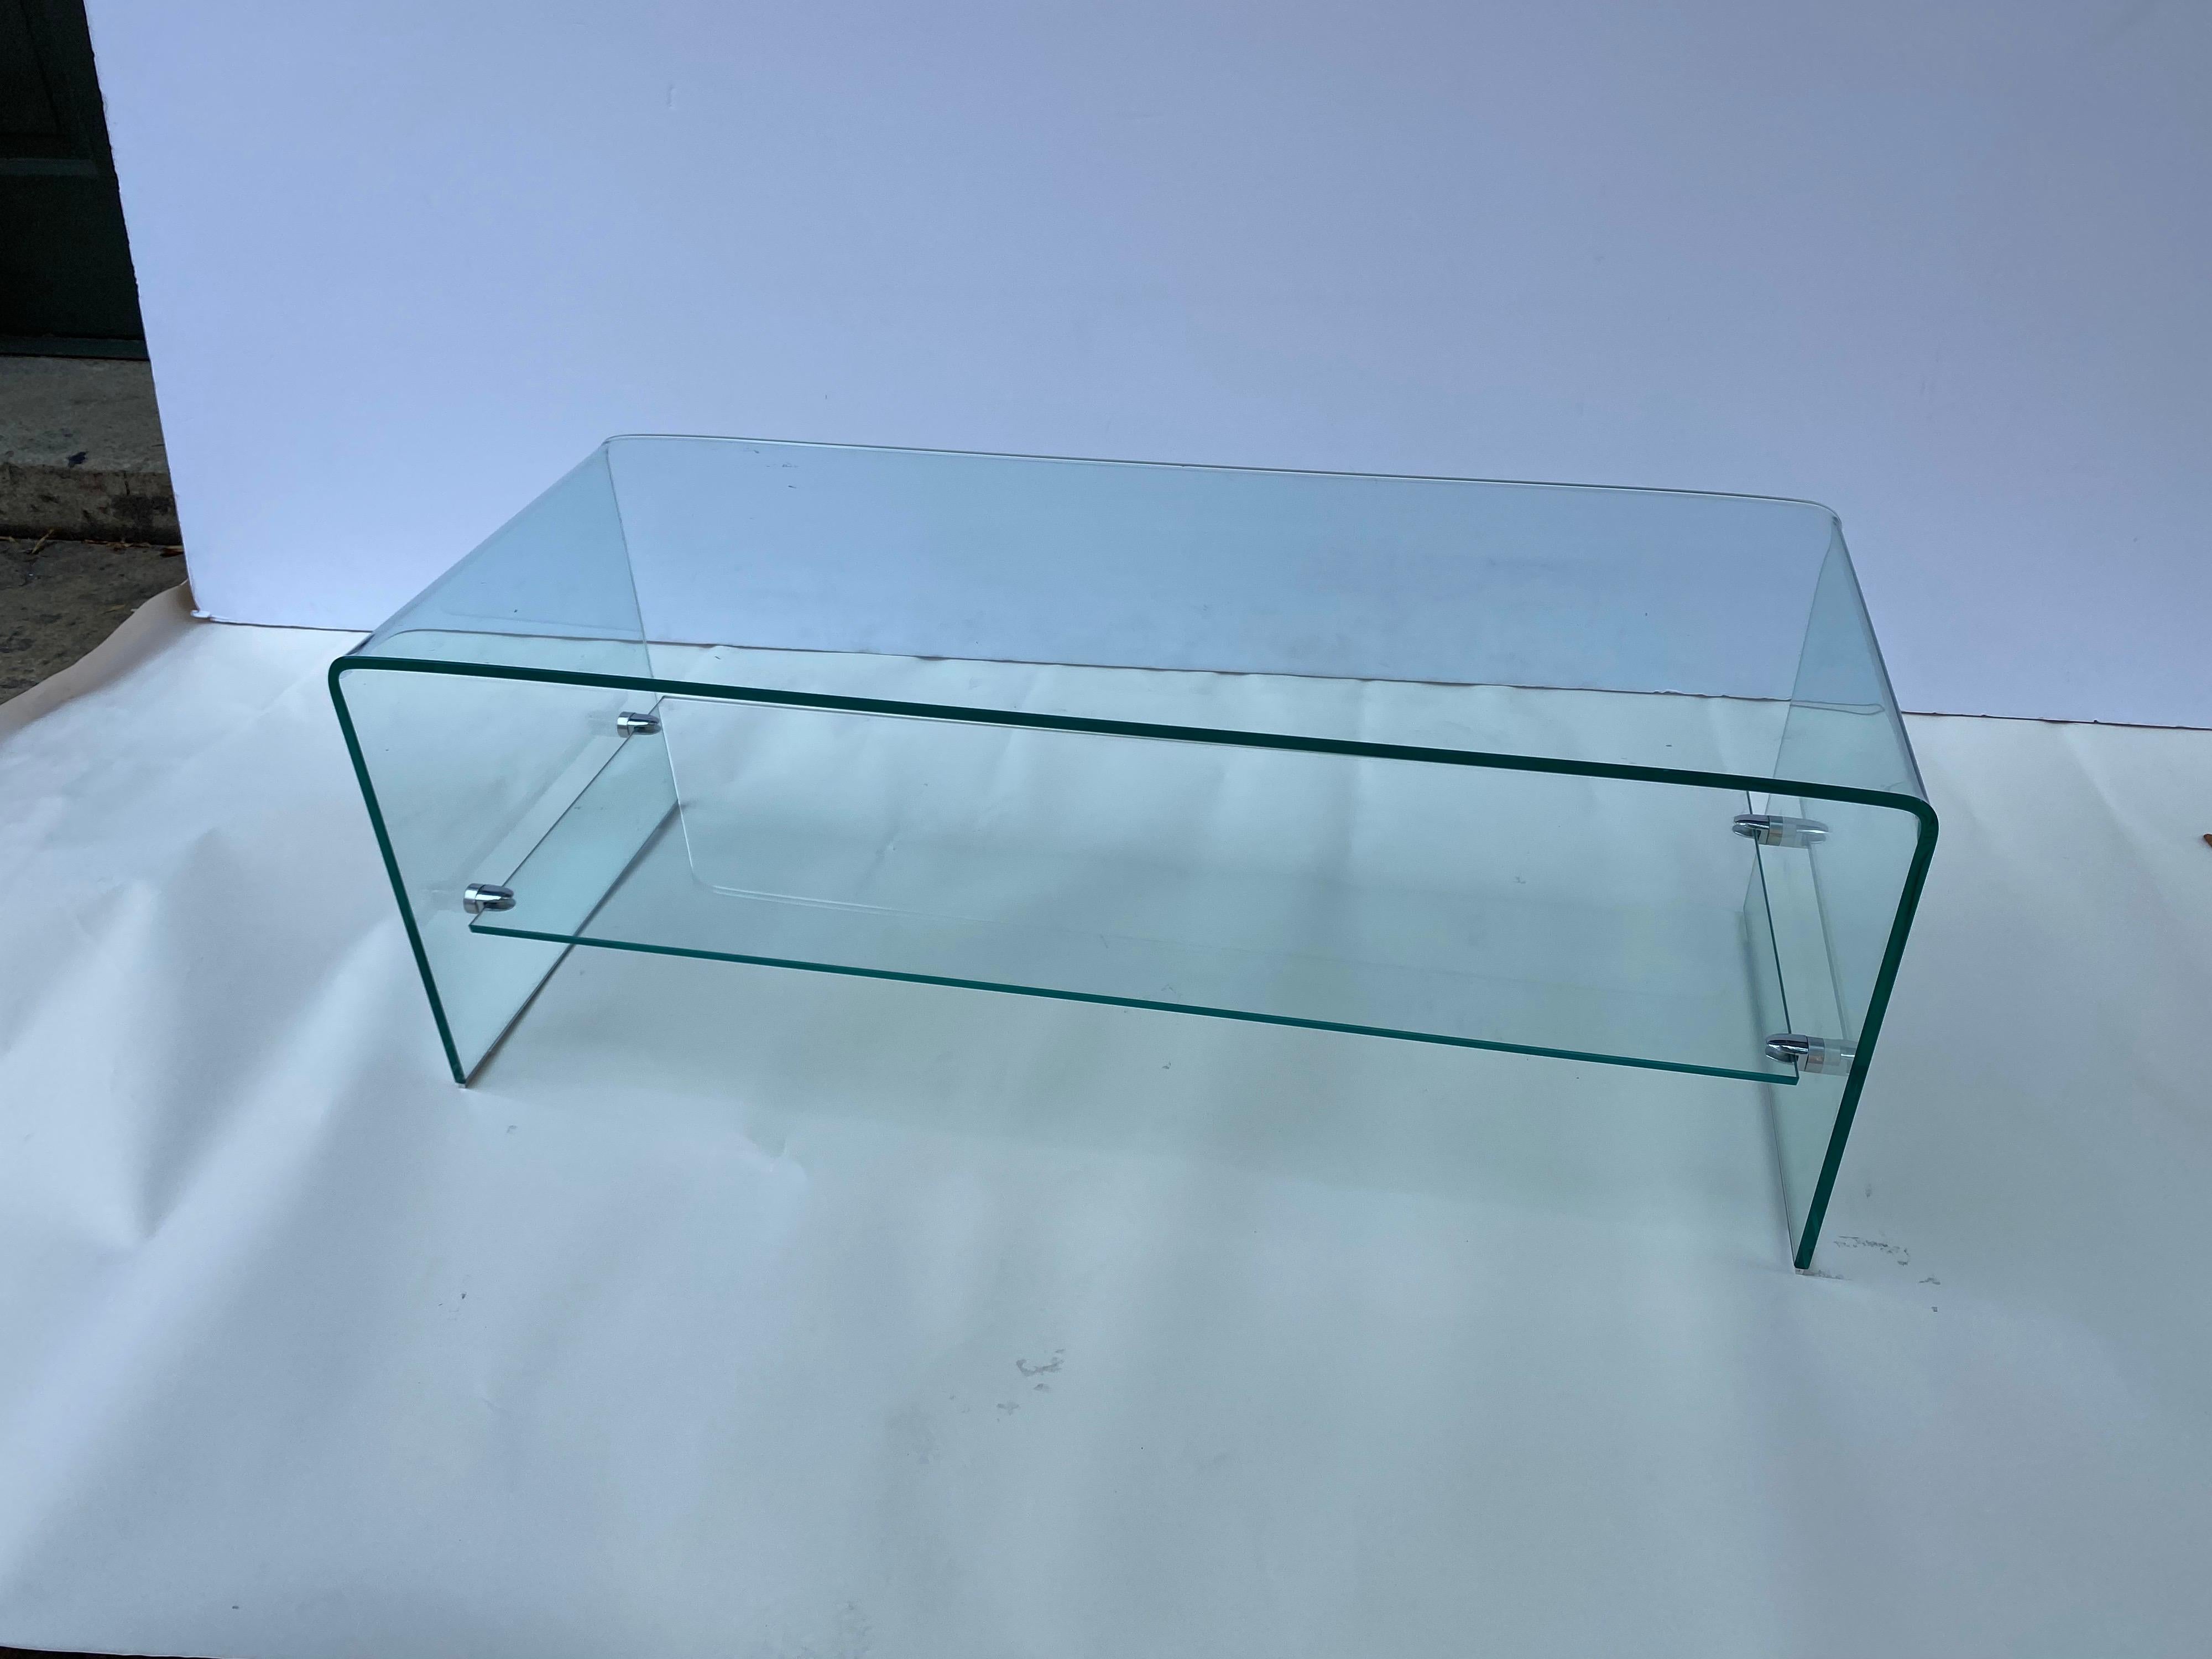 Nice scale and size waterfall glass coffee table with lower shelf. Nice sleek design, perfect for smaller spaces or next to a window!